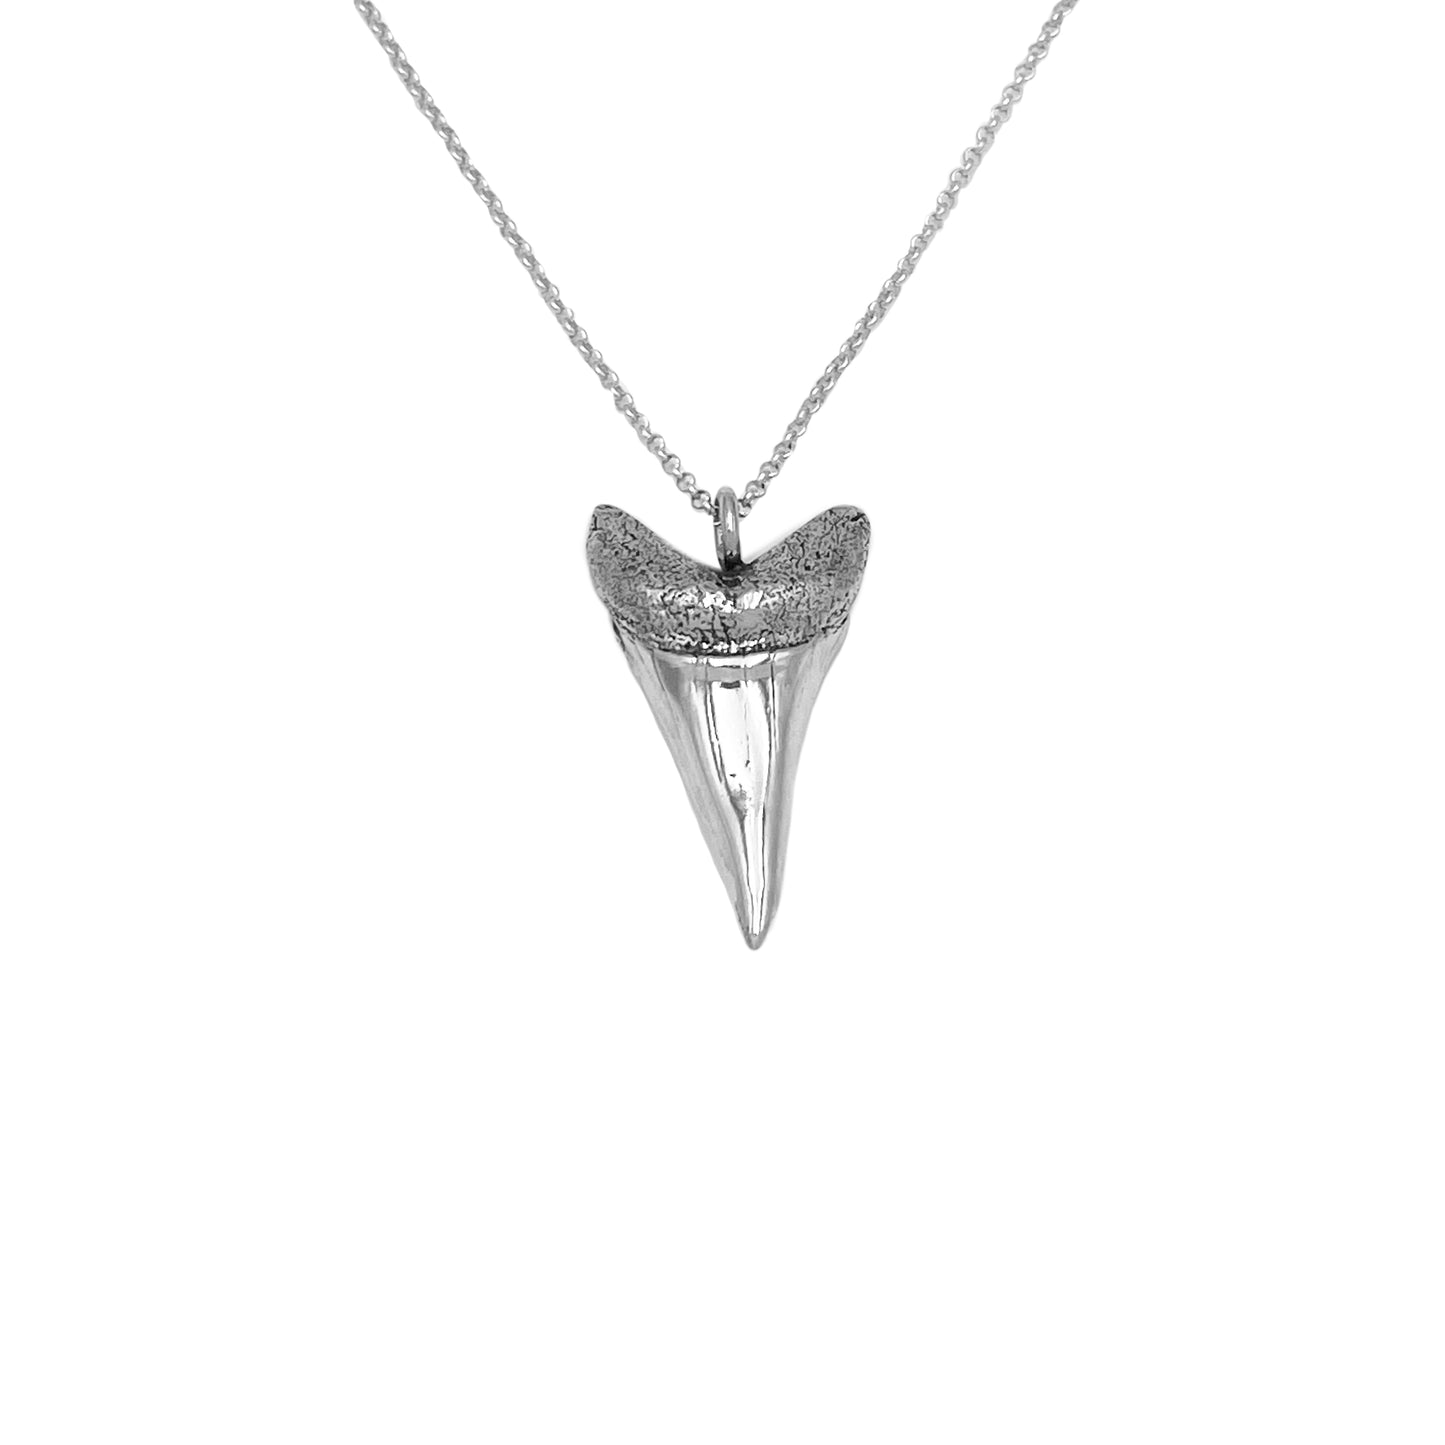 Mako Shark Tooth Necklace - Recycled Sterling Silver Shark Tooth Necklace - Gift for Him - Oxidized Silver Jewelry - Boyfriend gift - Mako Shark Tooth Necklace - Sterling Silver Shark Tooth Necklace - Gift for Him - Oxidized Silver Necklace - Men's Gift - Father's Day Gift